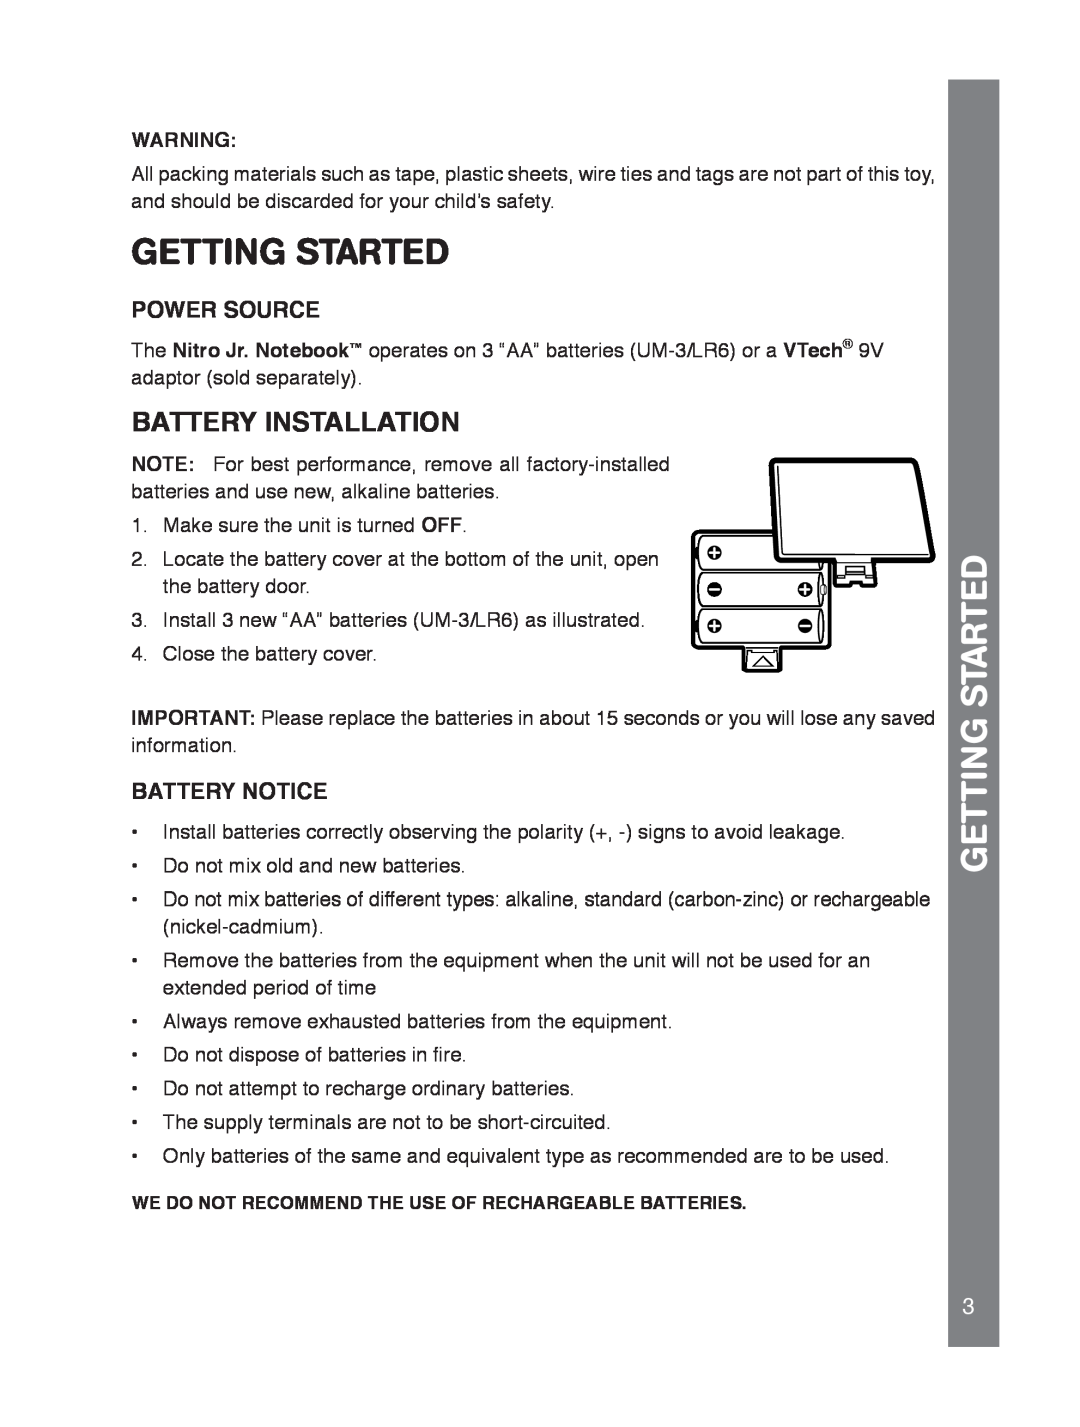 VTech 91-02239-001 manual Getting Started, getting started, Battery Installation, Power Source, Battery Notice 